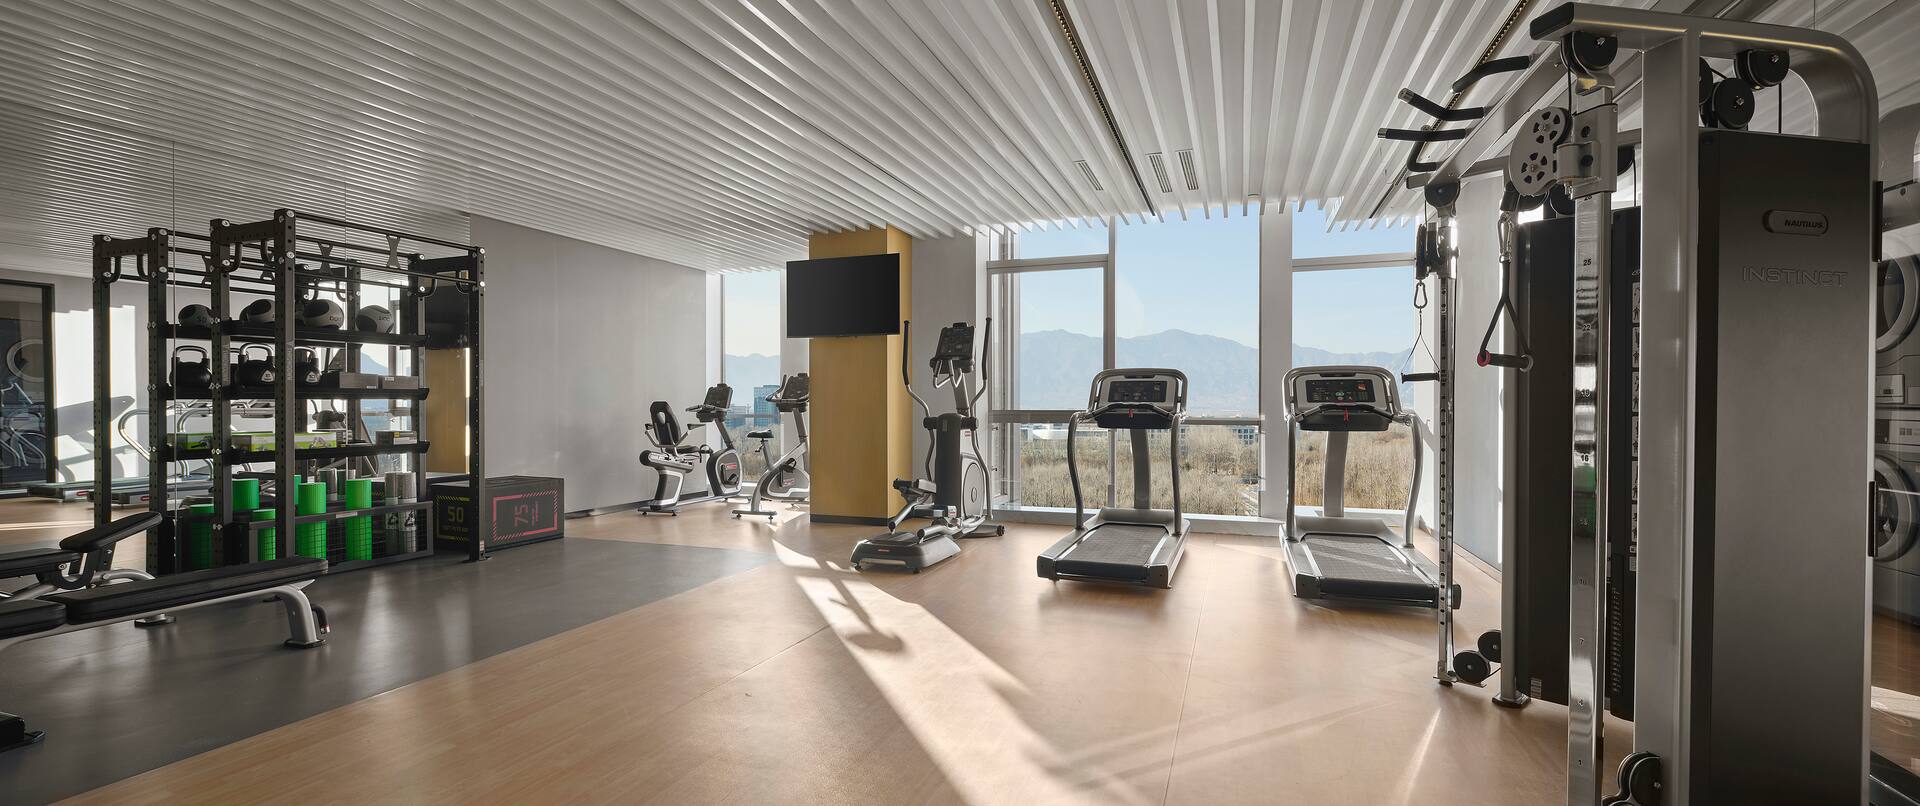 Gym with treadmills and weights machines